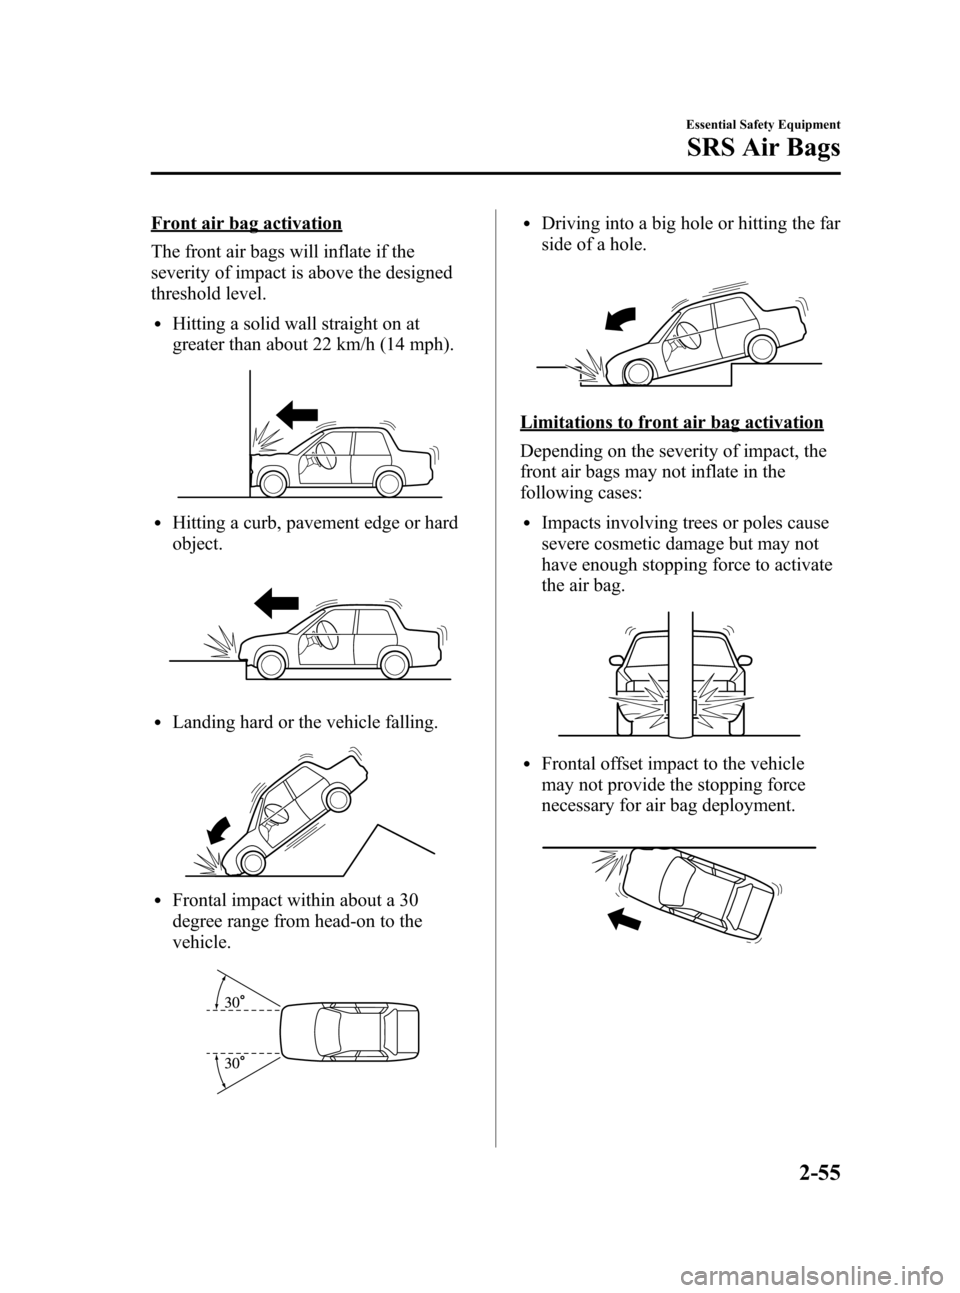 MAZDA MODEL 3 HATCHBACK 2007   (in English) Repair Manual Black plate (69,1)
Front air bag activation
The front air bags will inflate if the
severity of impact is above the designed
threshold level.
lHitting a solid wall straight on at
greater than about 22 